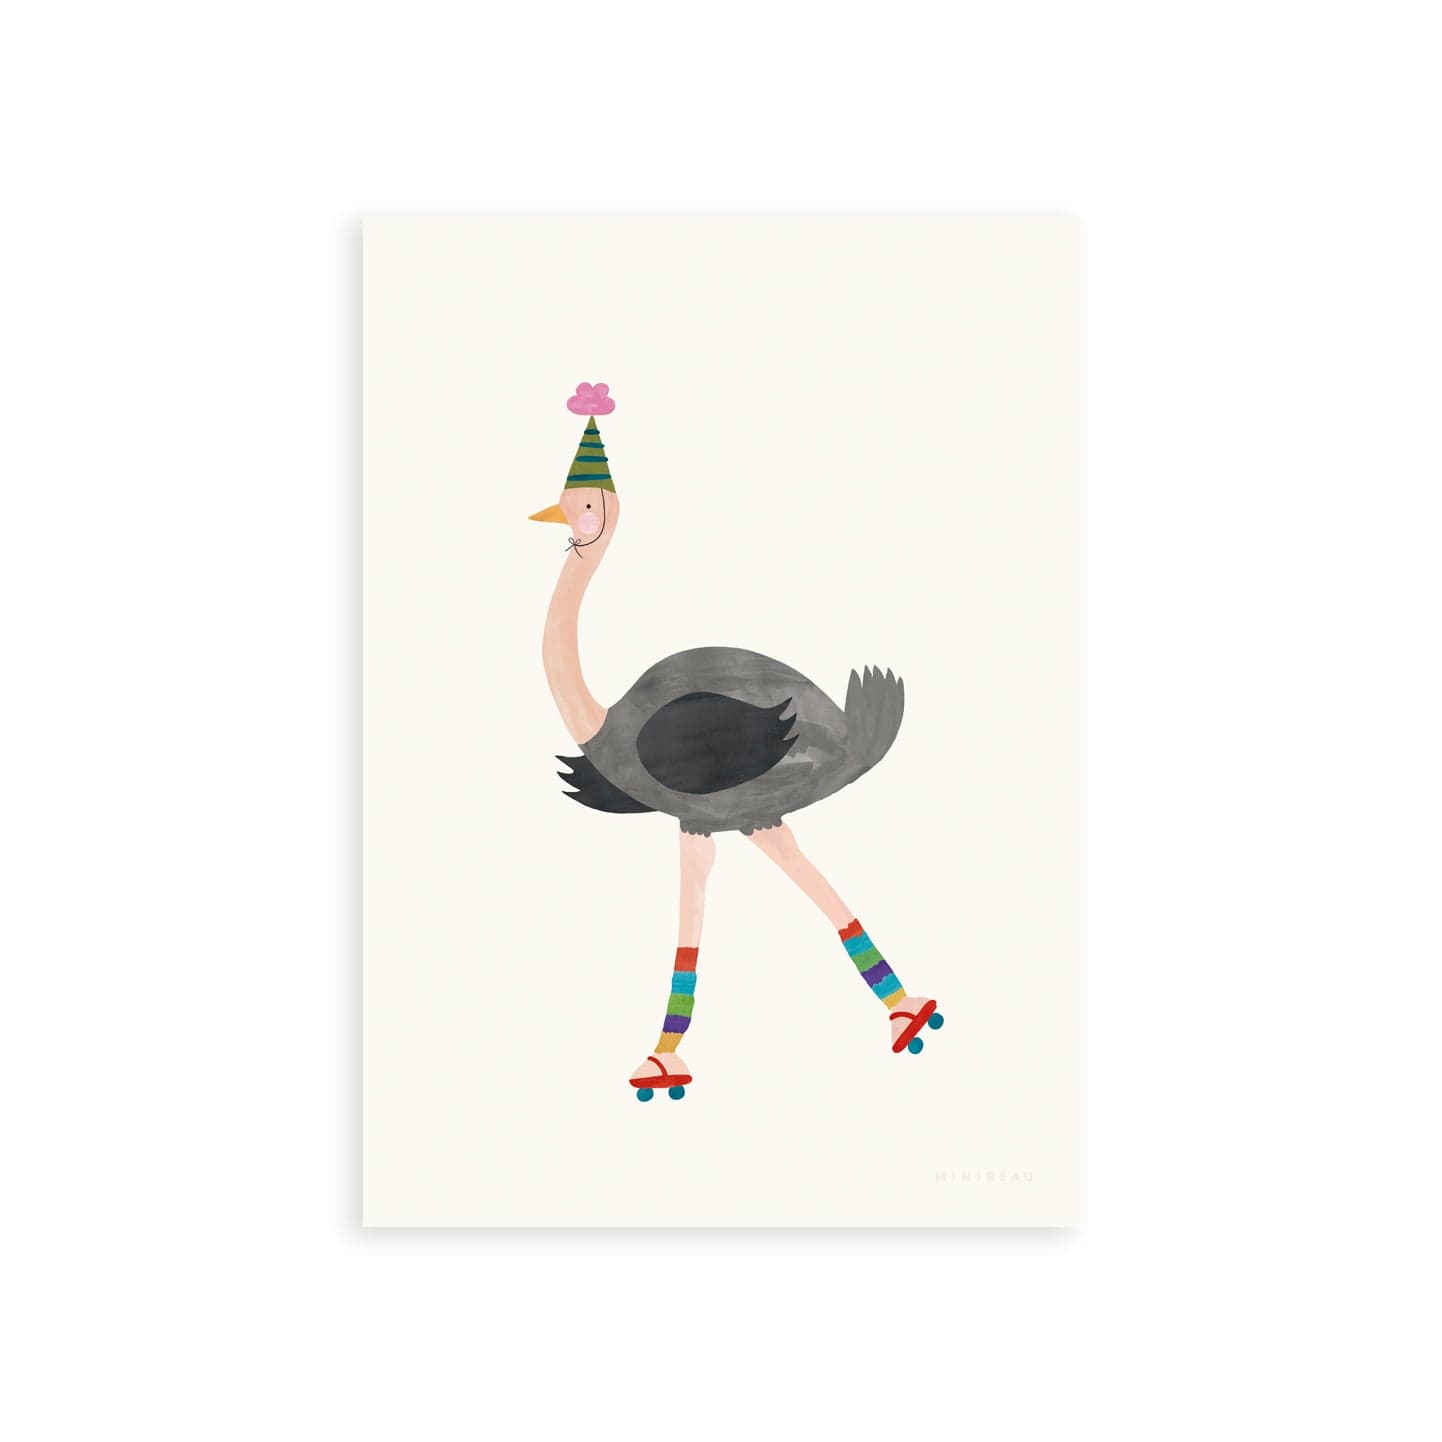 Our Ostrich art print features a skating ostrich in red skates with rainbow-coloured leg warmers. Wearing a party hat with a pink pom pom on the top of it as it skates, all on a neutral cream background.